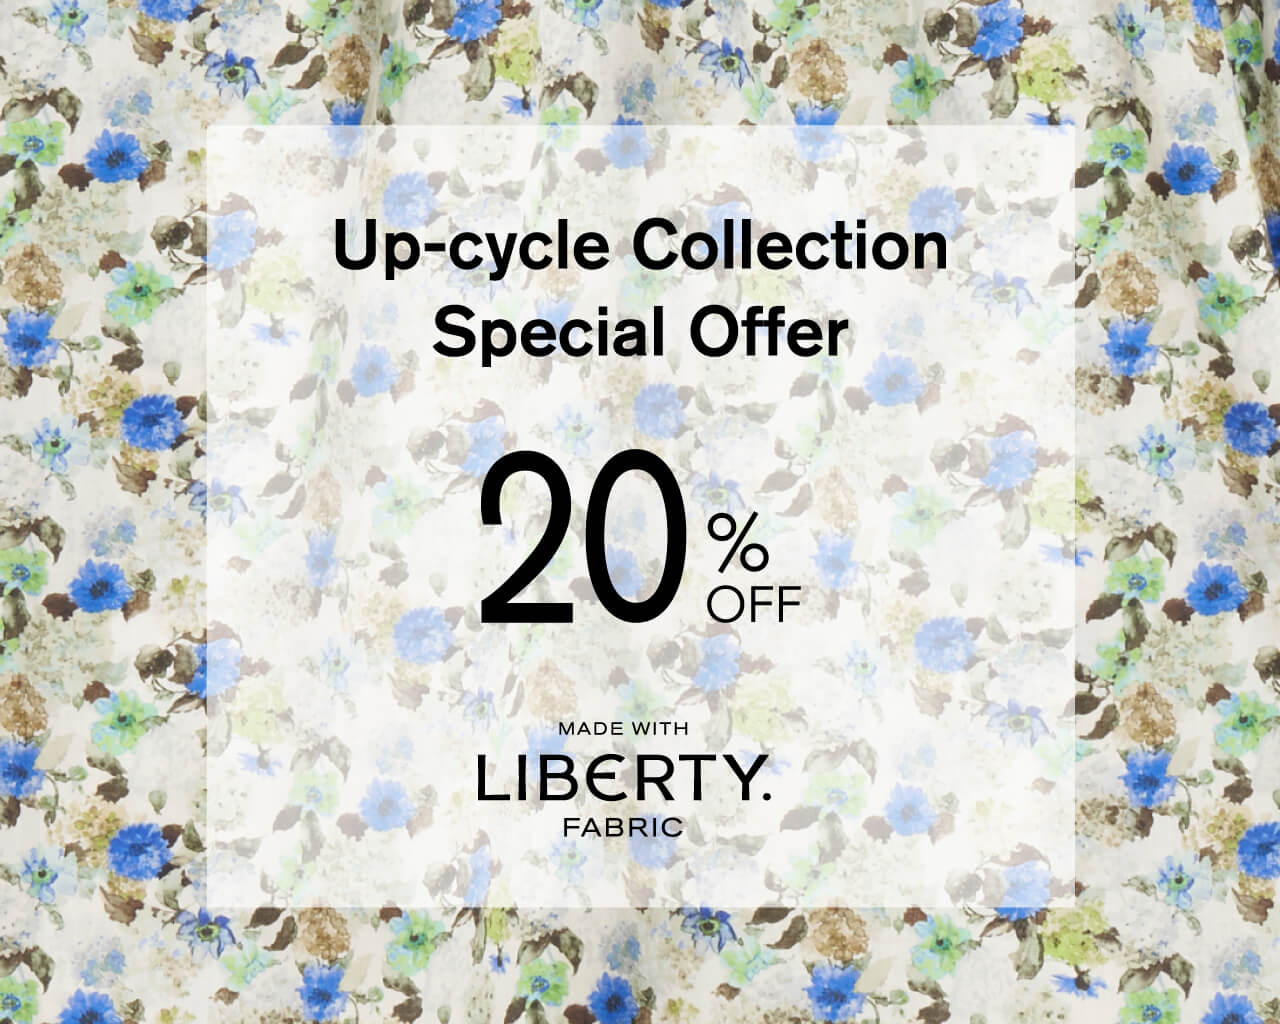 up-cycle collection special offer 20%off リバティ